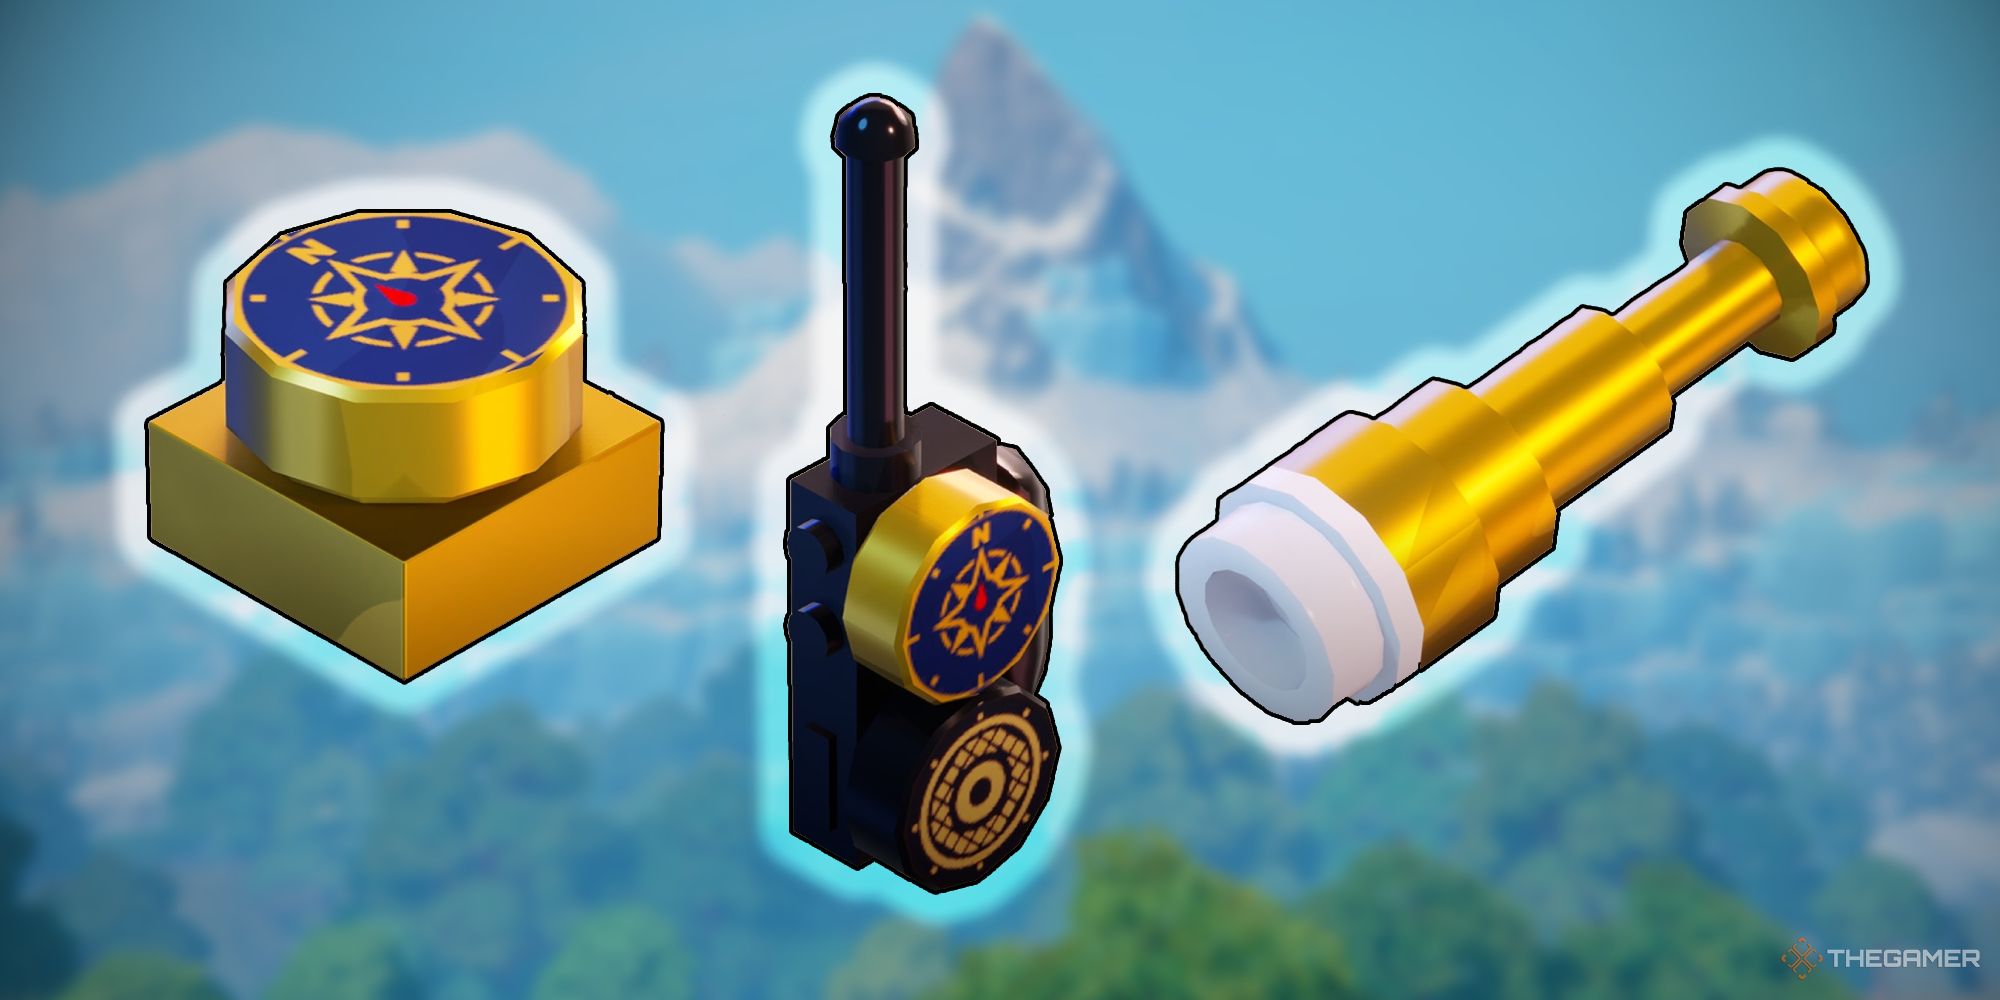 How To Unlock New Fishing Rod, Compass, And Spyglass In Lego